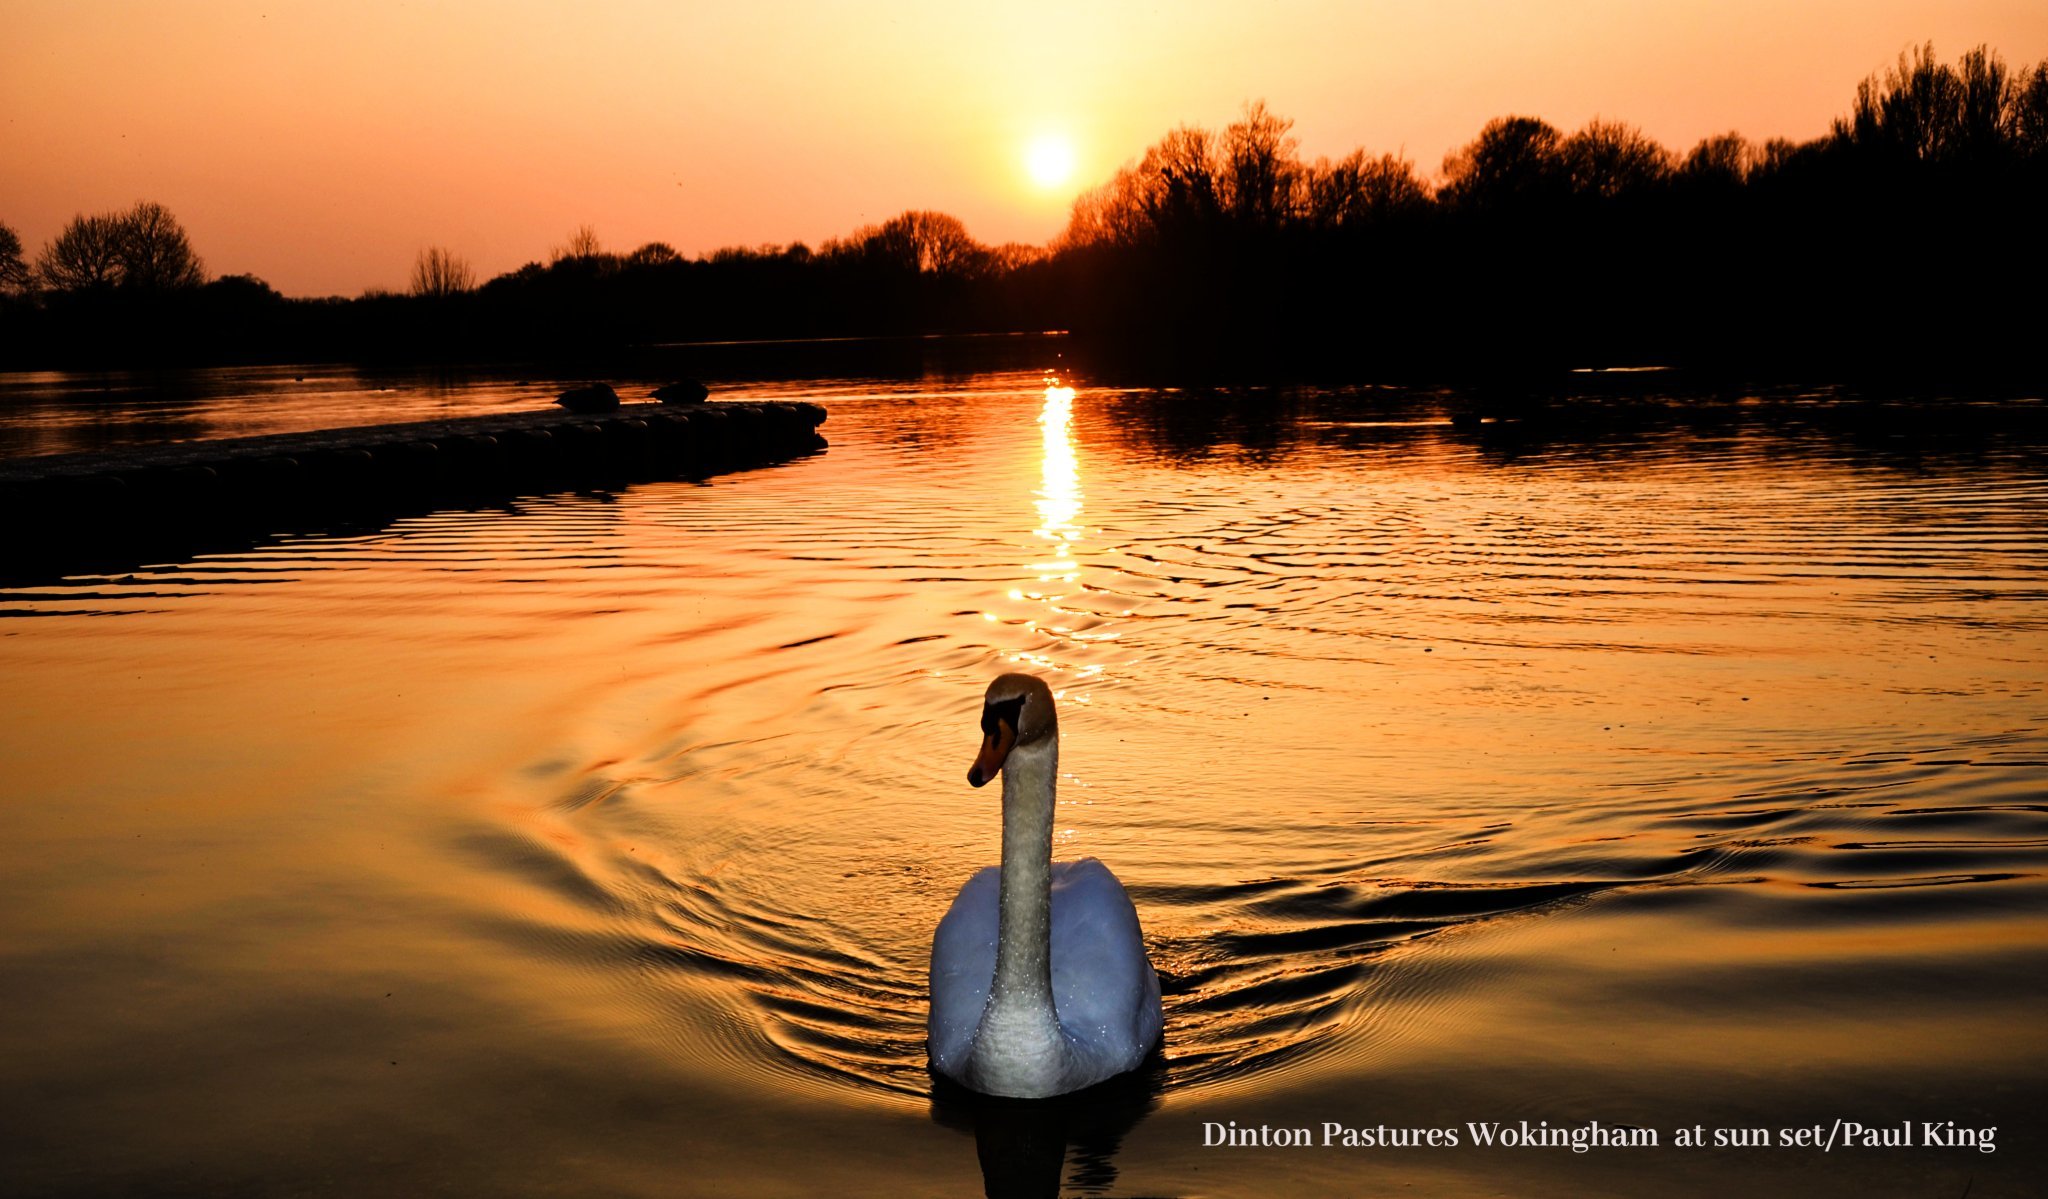 Sunsets and a swan (Paul King)